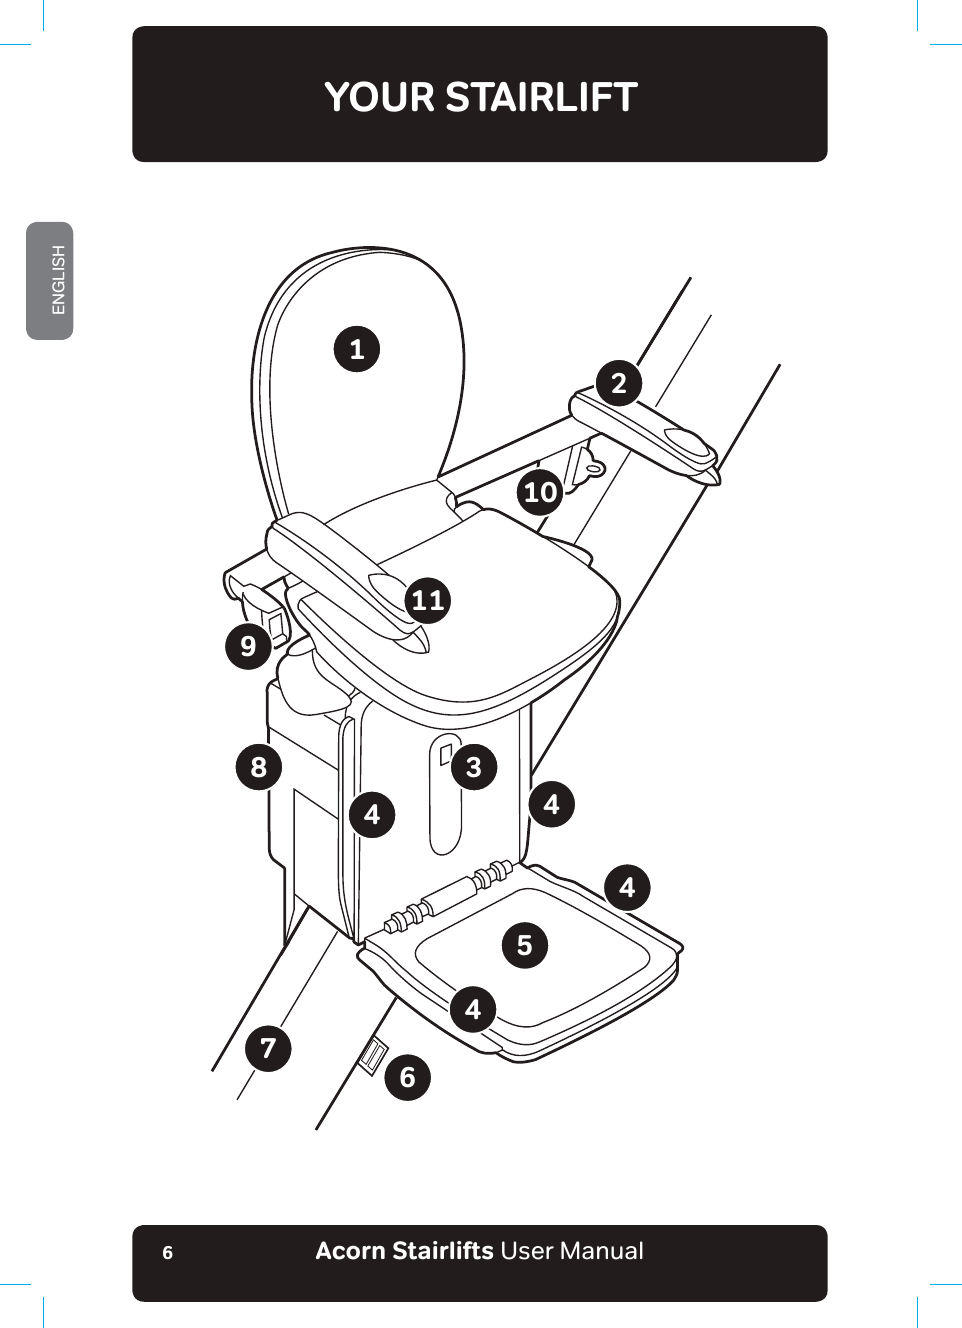 Acorn Stairlifts User ManualENGLISH6YOUR STAIRLIFT1325467810911444